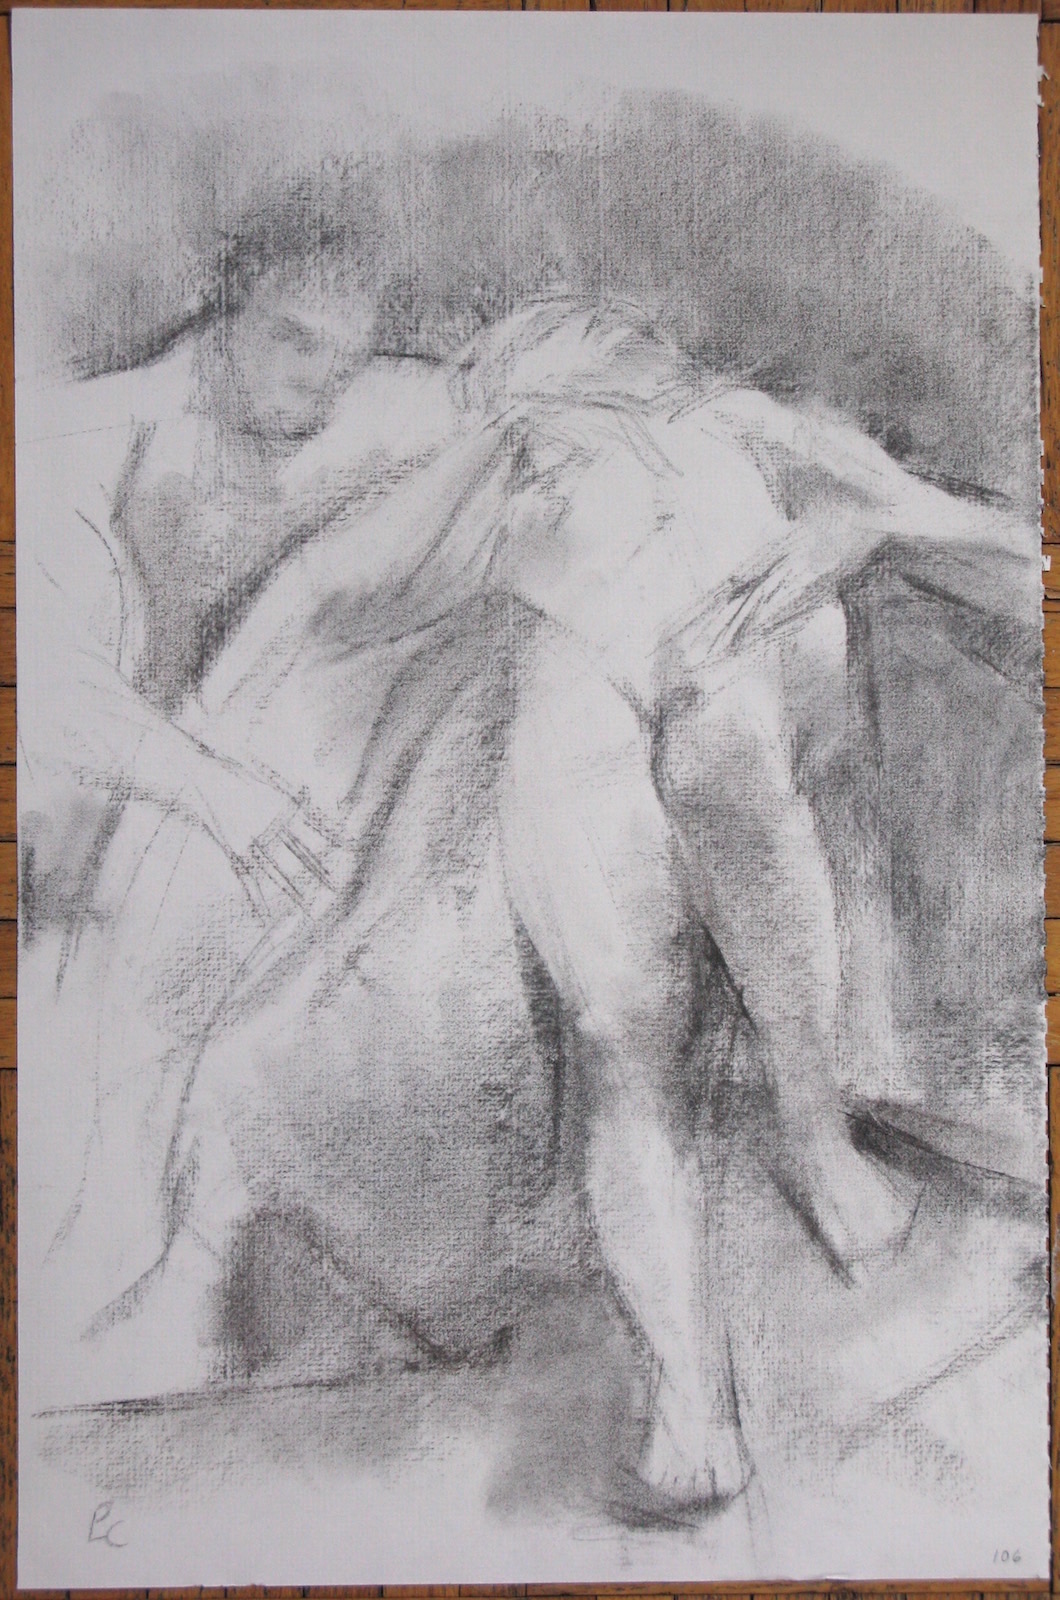 Nymph and Satyr, 18 x 12 inches, charcoal